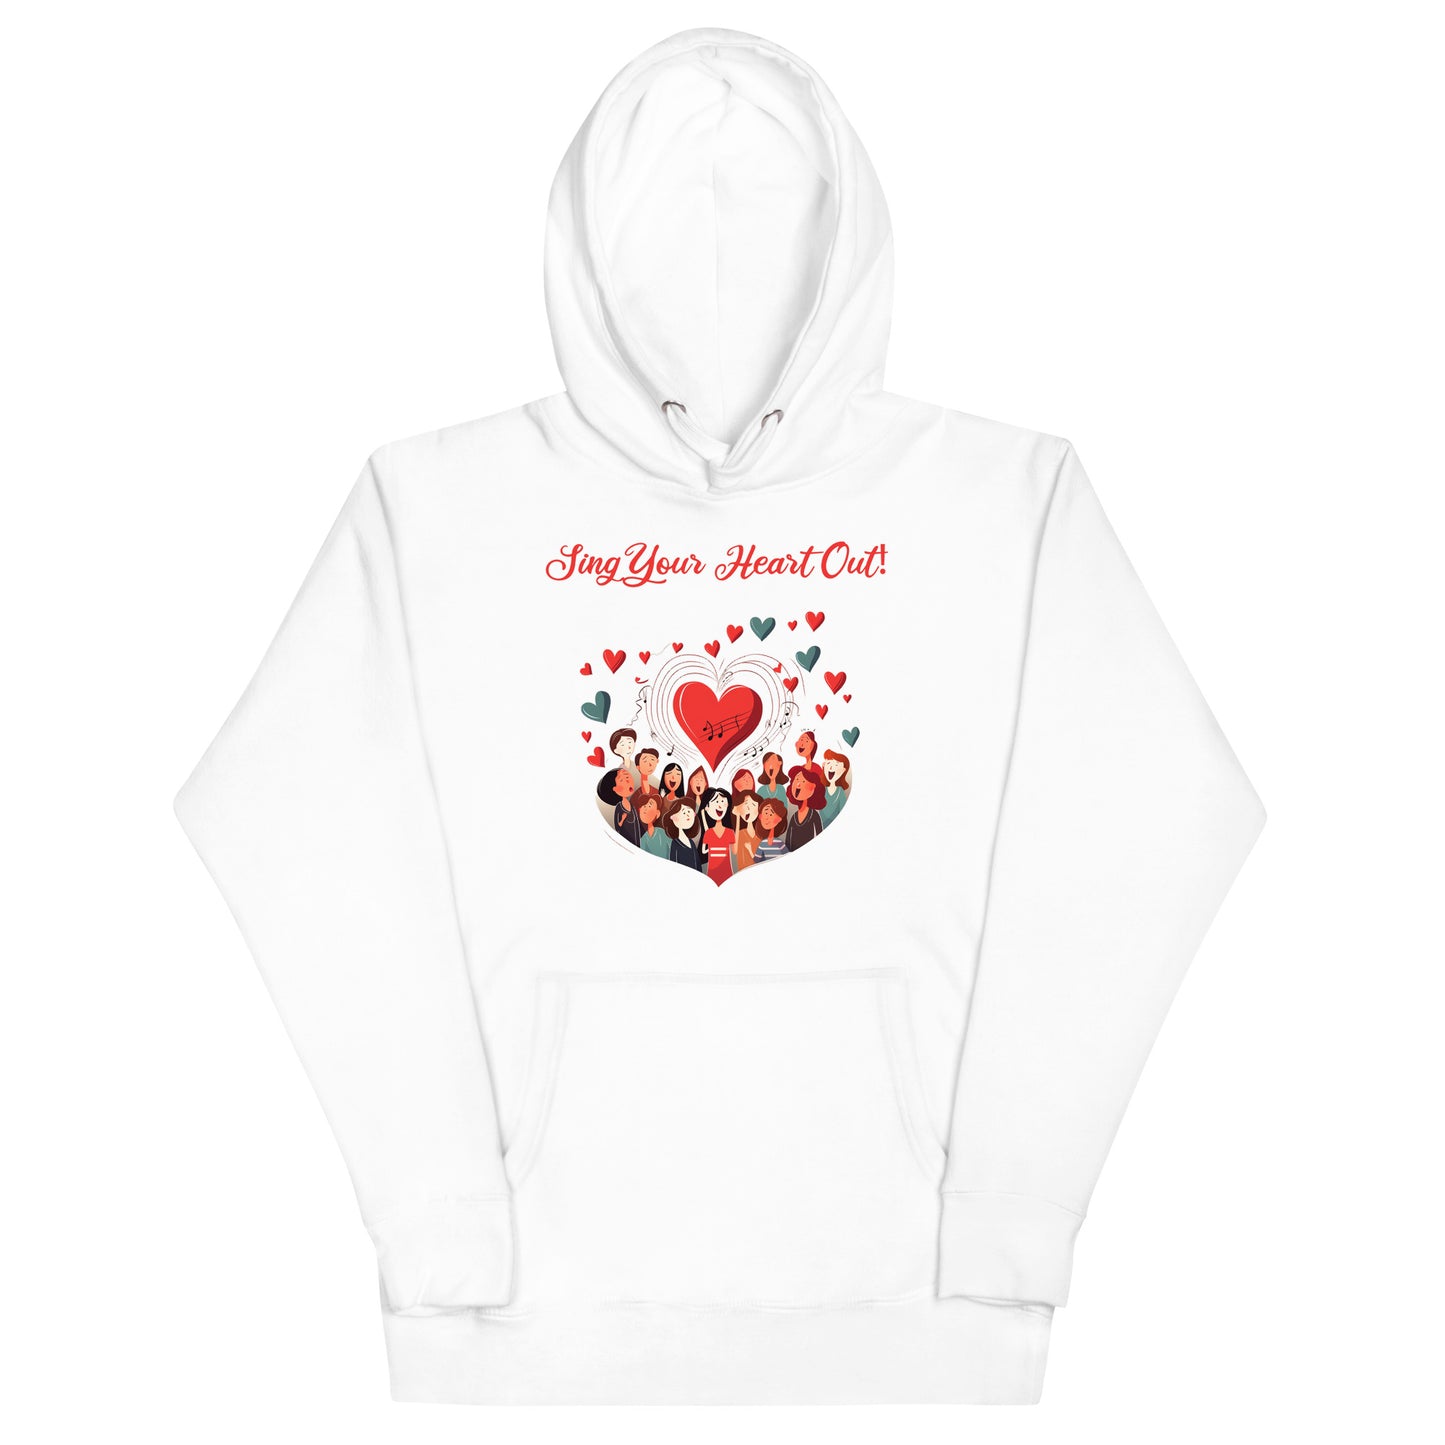 Sing Your Heart Out - Unisex Hoodie